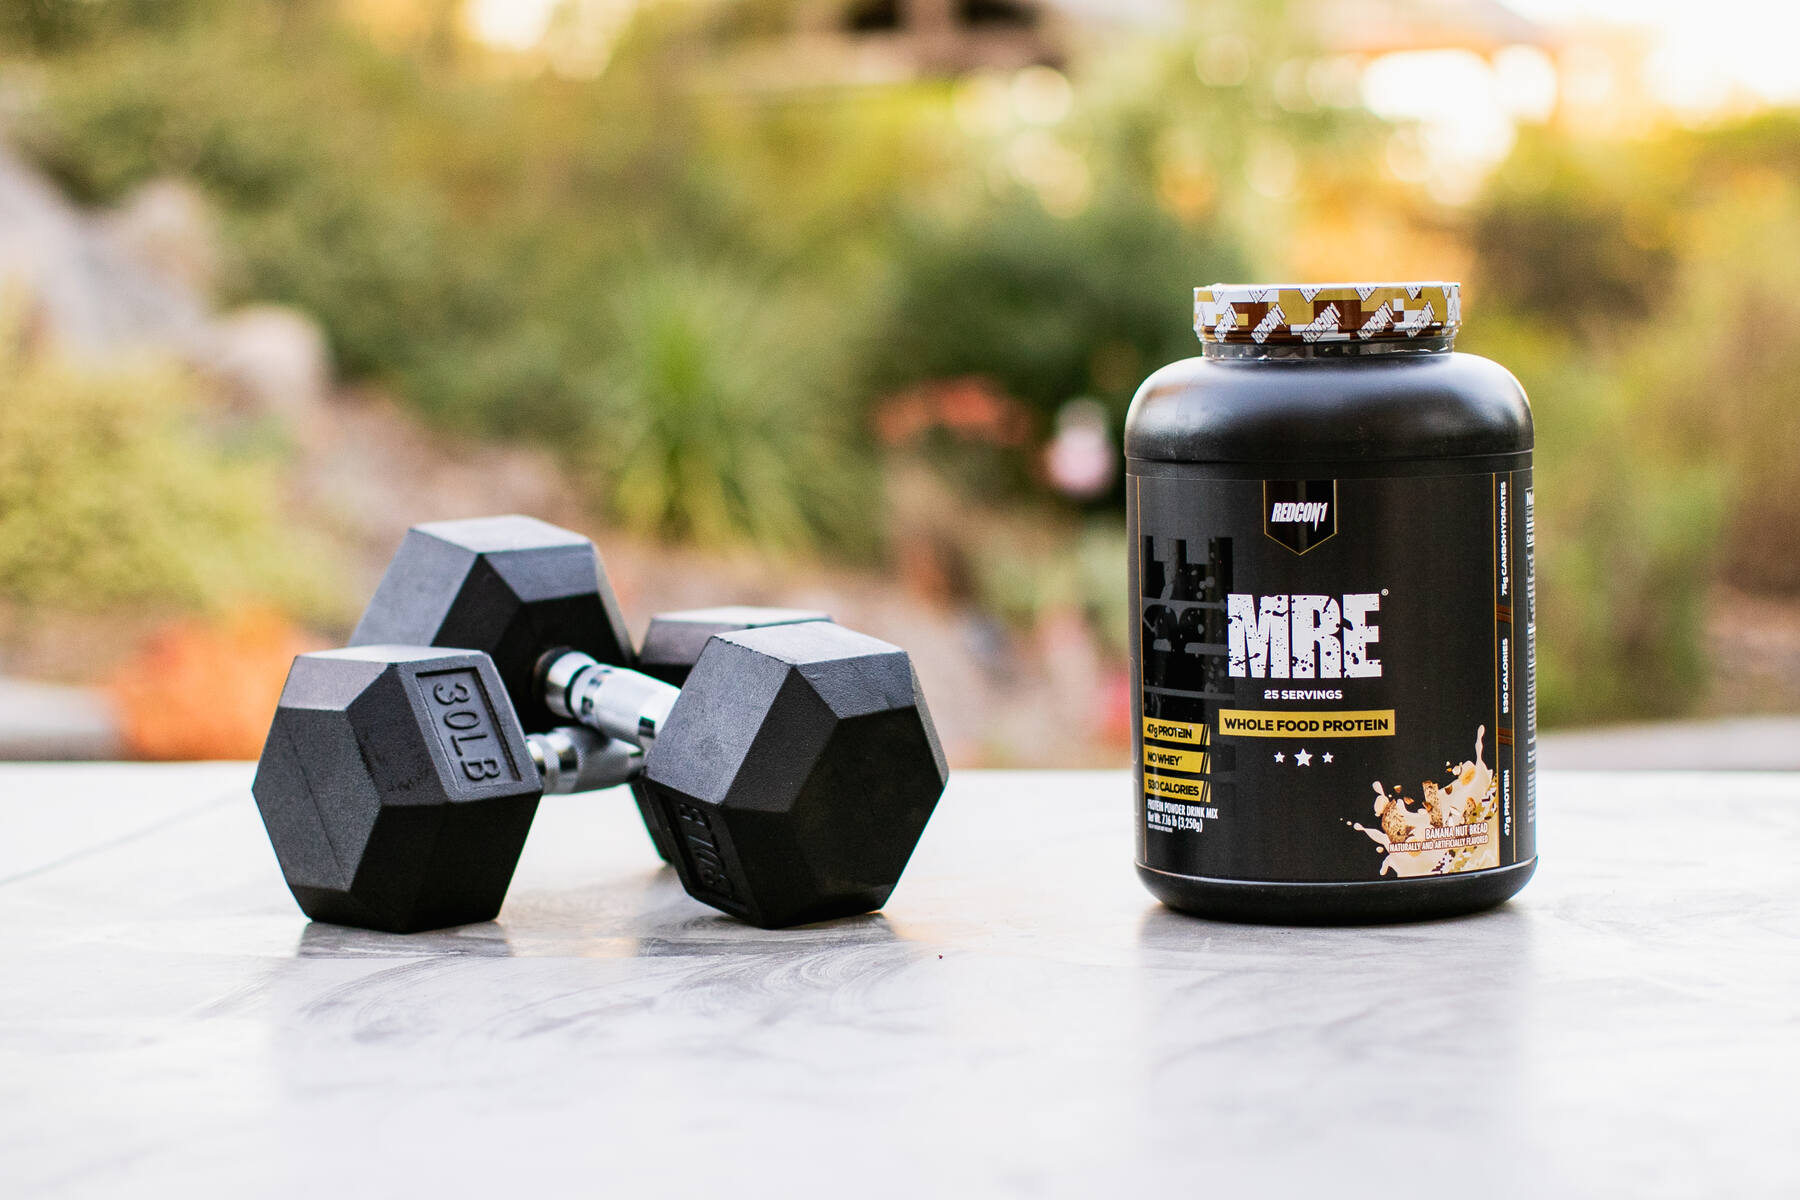 An outdoor setting with a black container of Redcon1 MRE Whole Food Protein on a surface next to a pair of black dumbbells, with natural greenery in the background